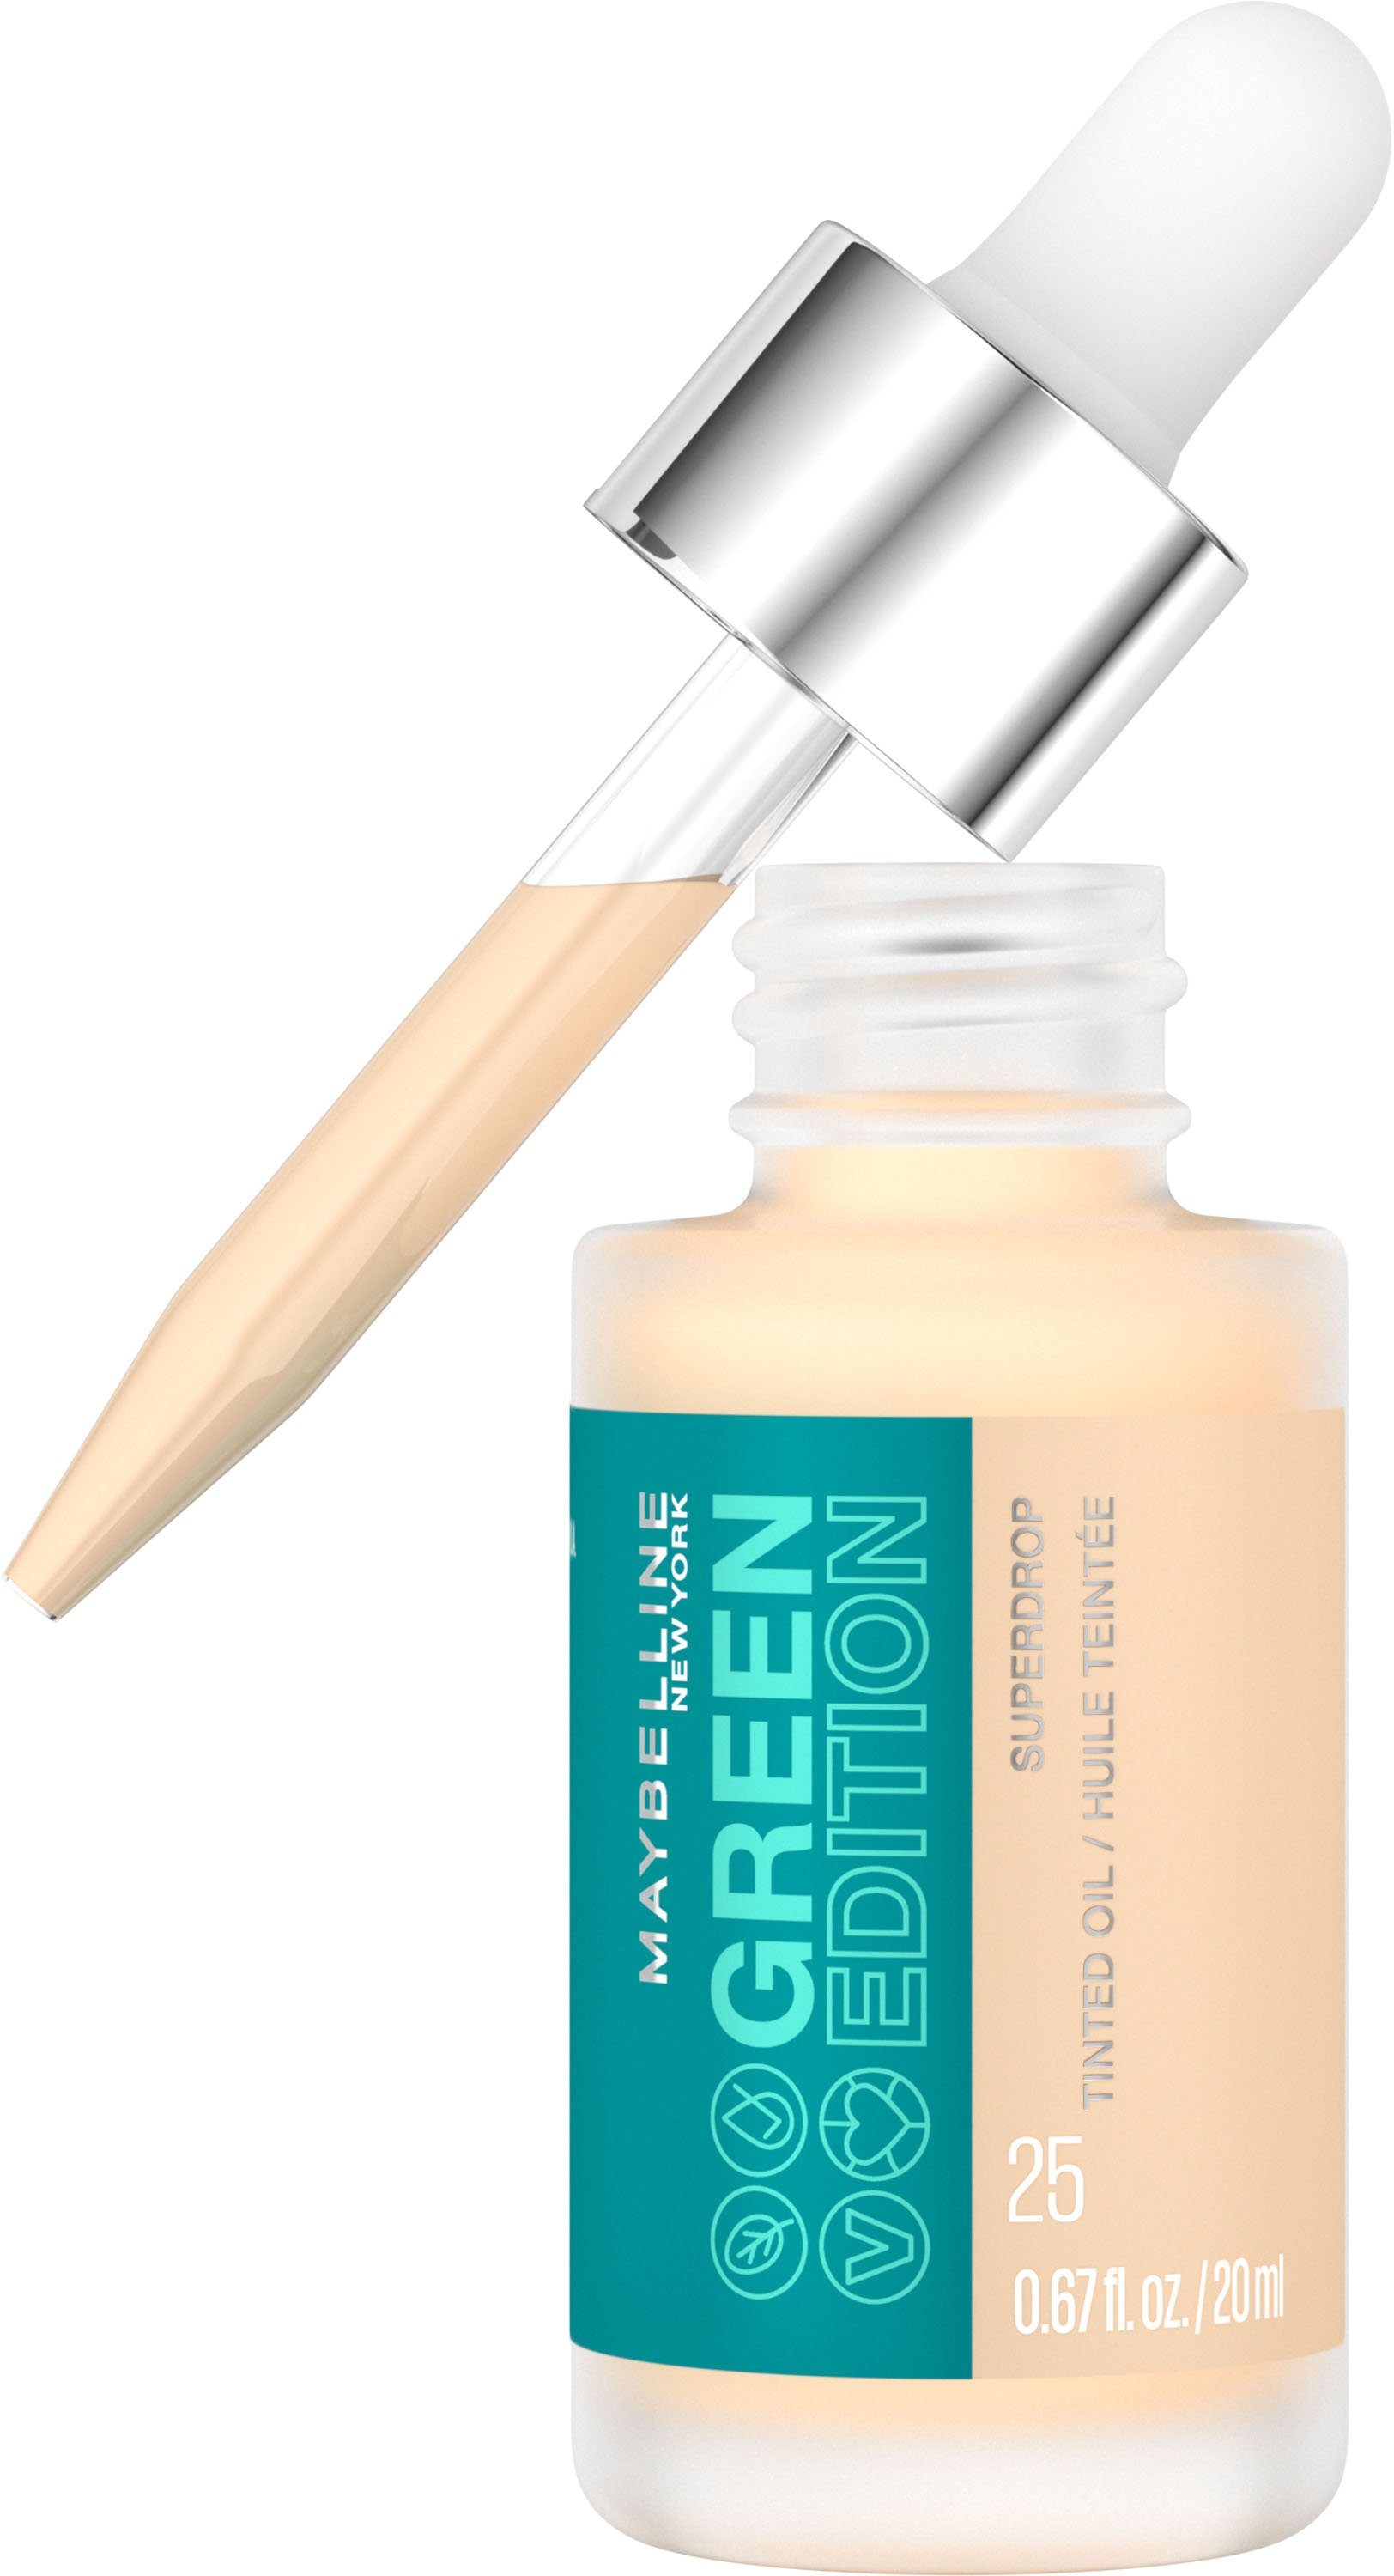 MAYBELLINE NEW YORK Oil Tinted Dry ED GREEN DRY Foundation Superdrop 25 TINT OIL